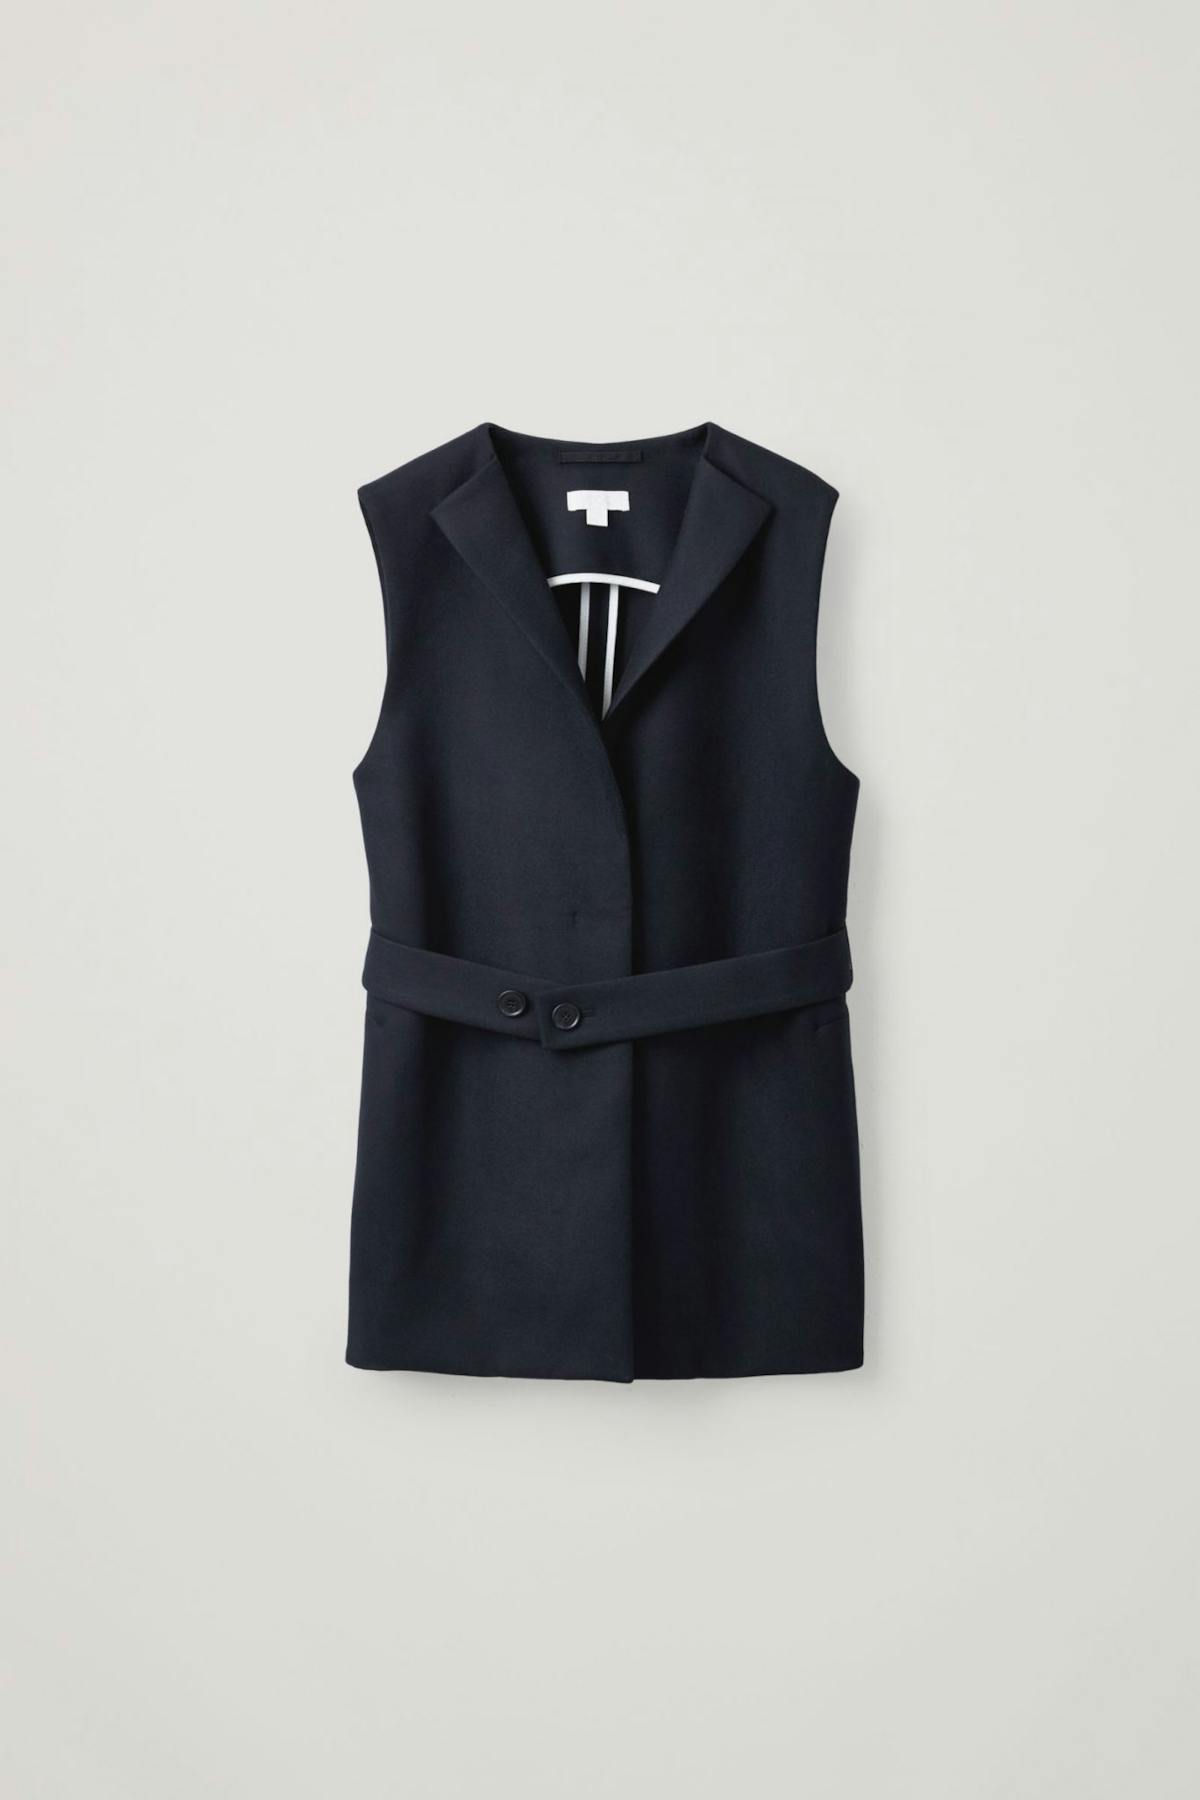 The best waistcoats to buy now for s/s20